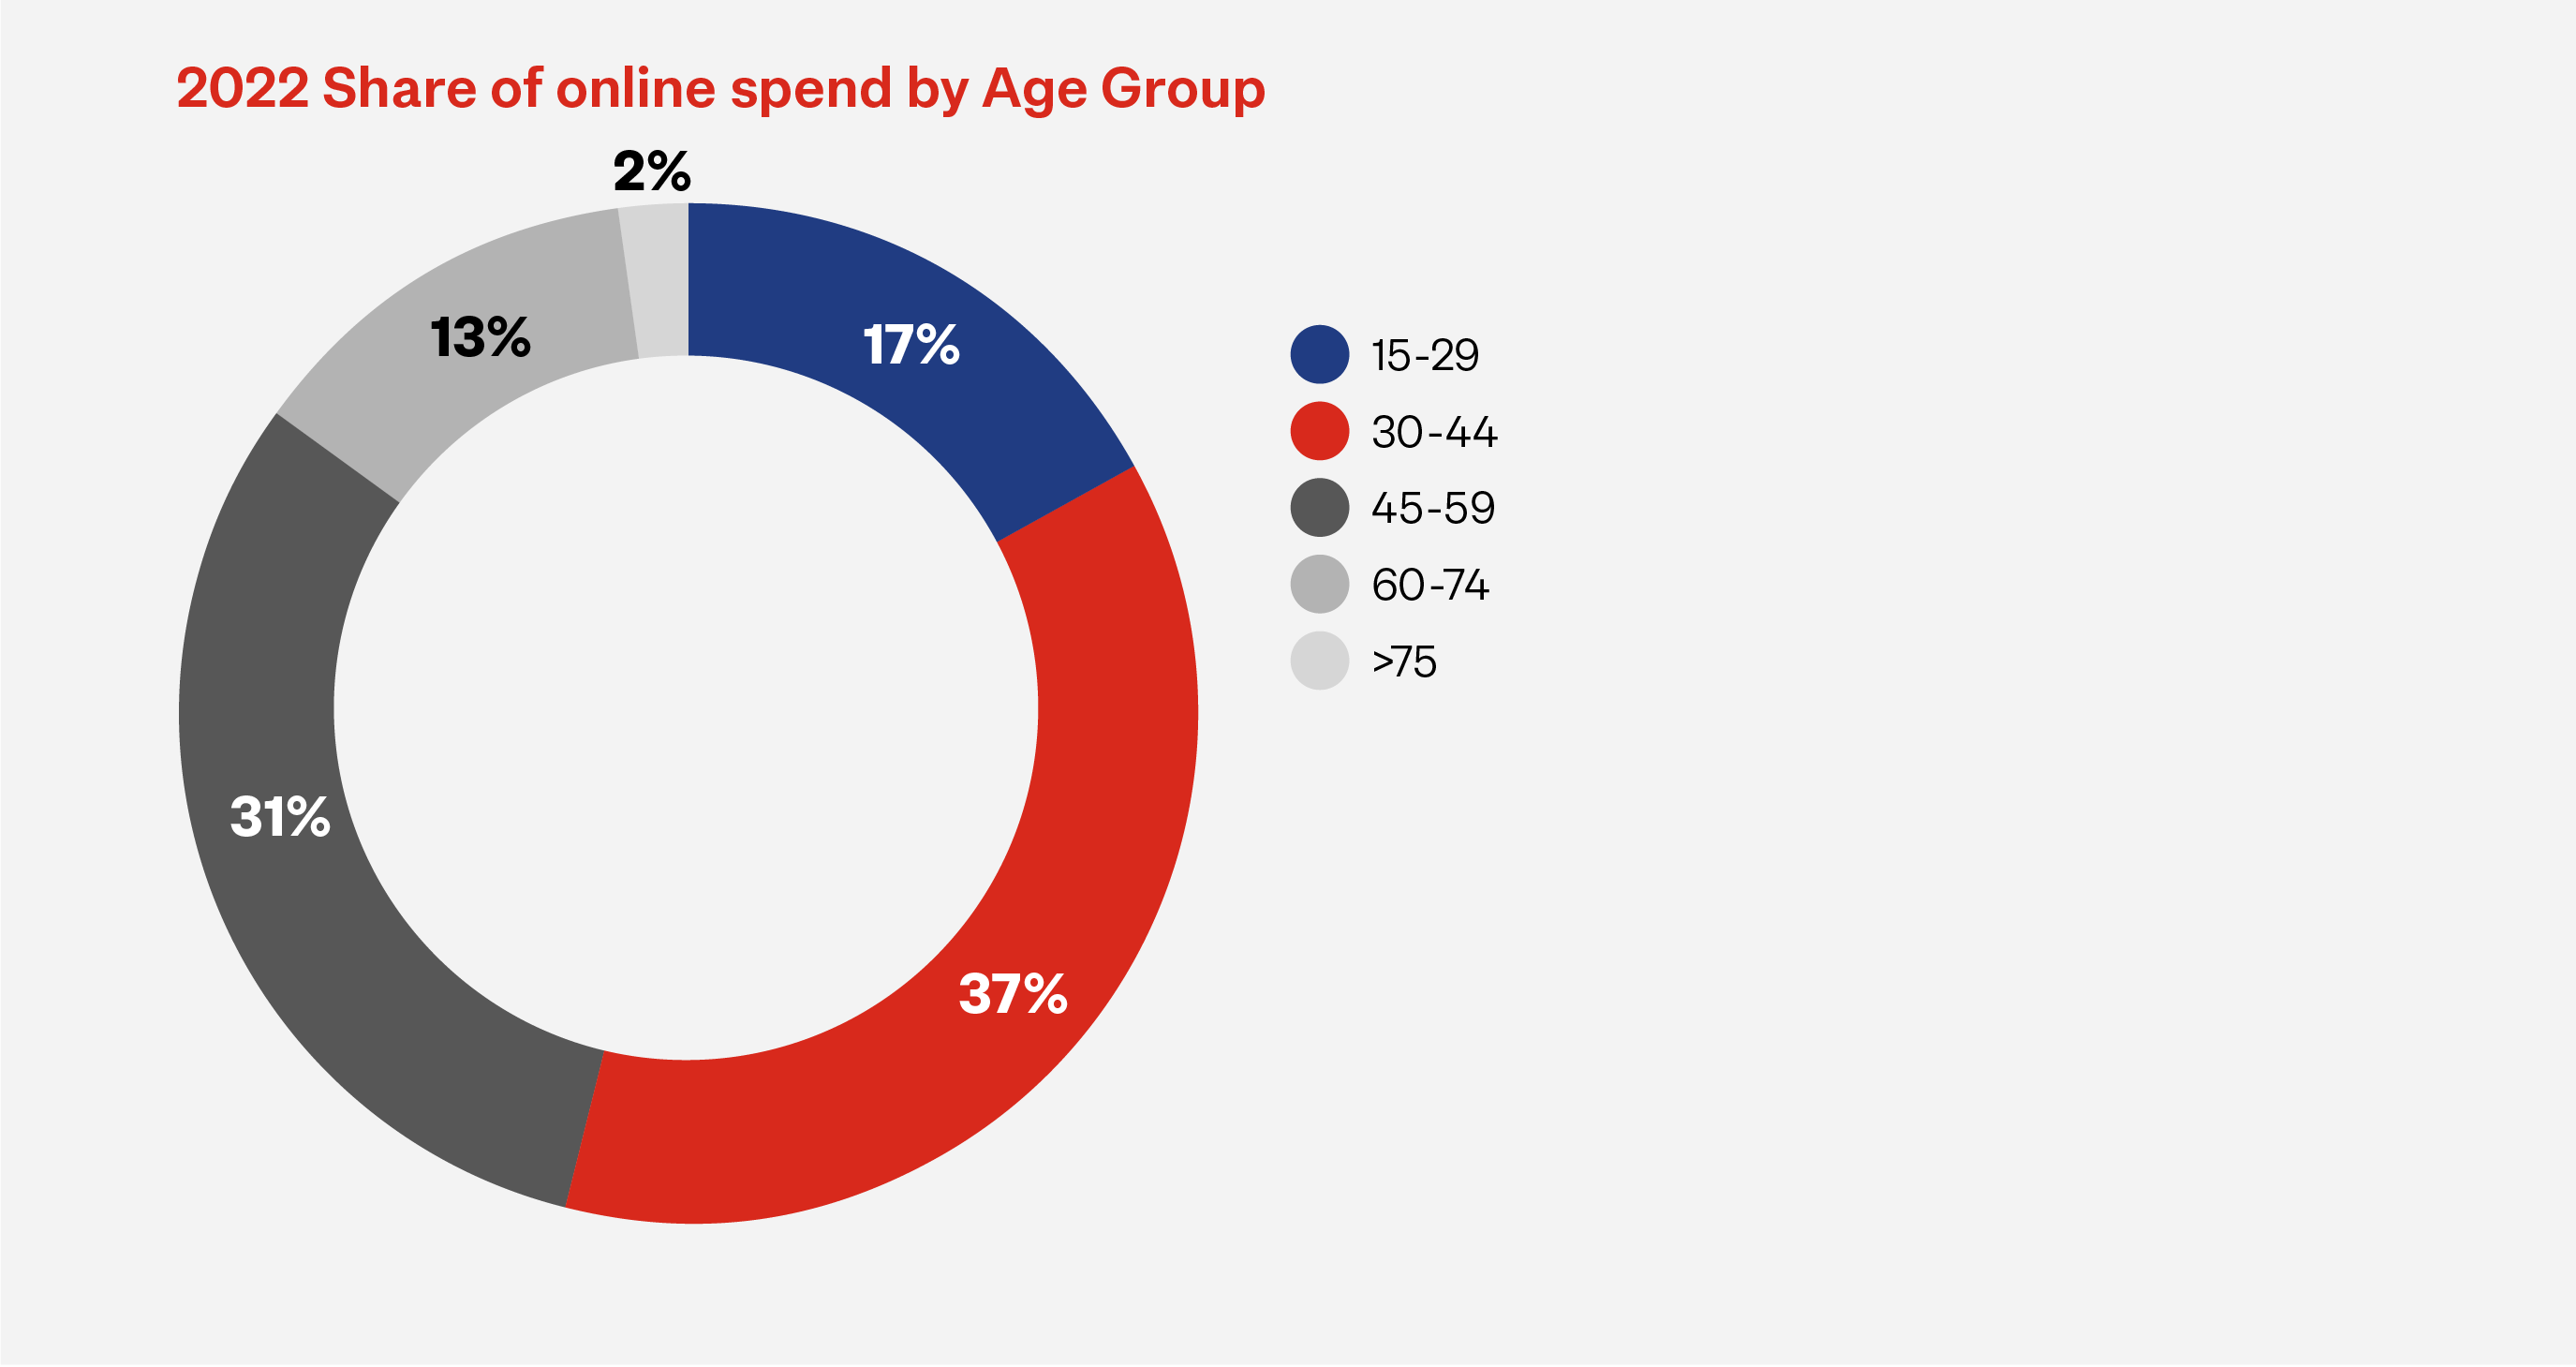 Pie graph showing 2022 online share of online spend by age group